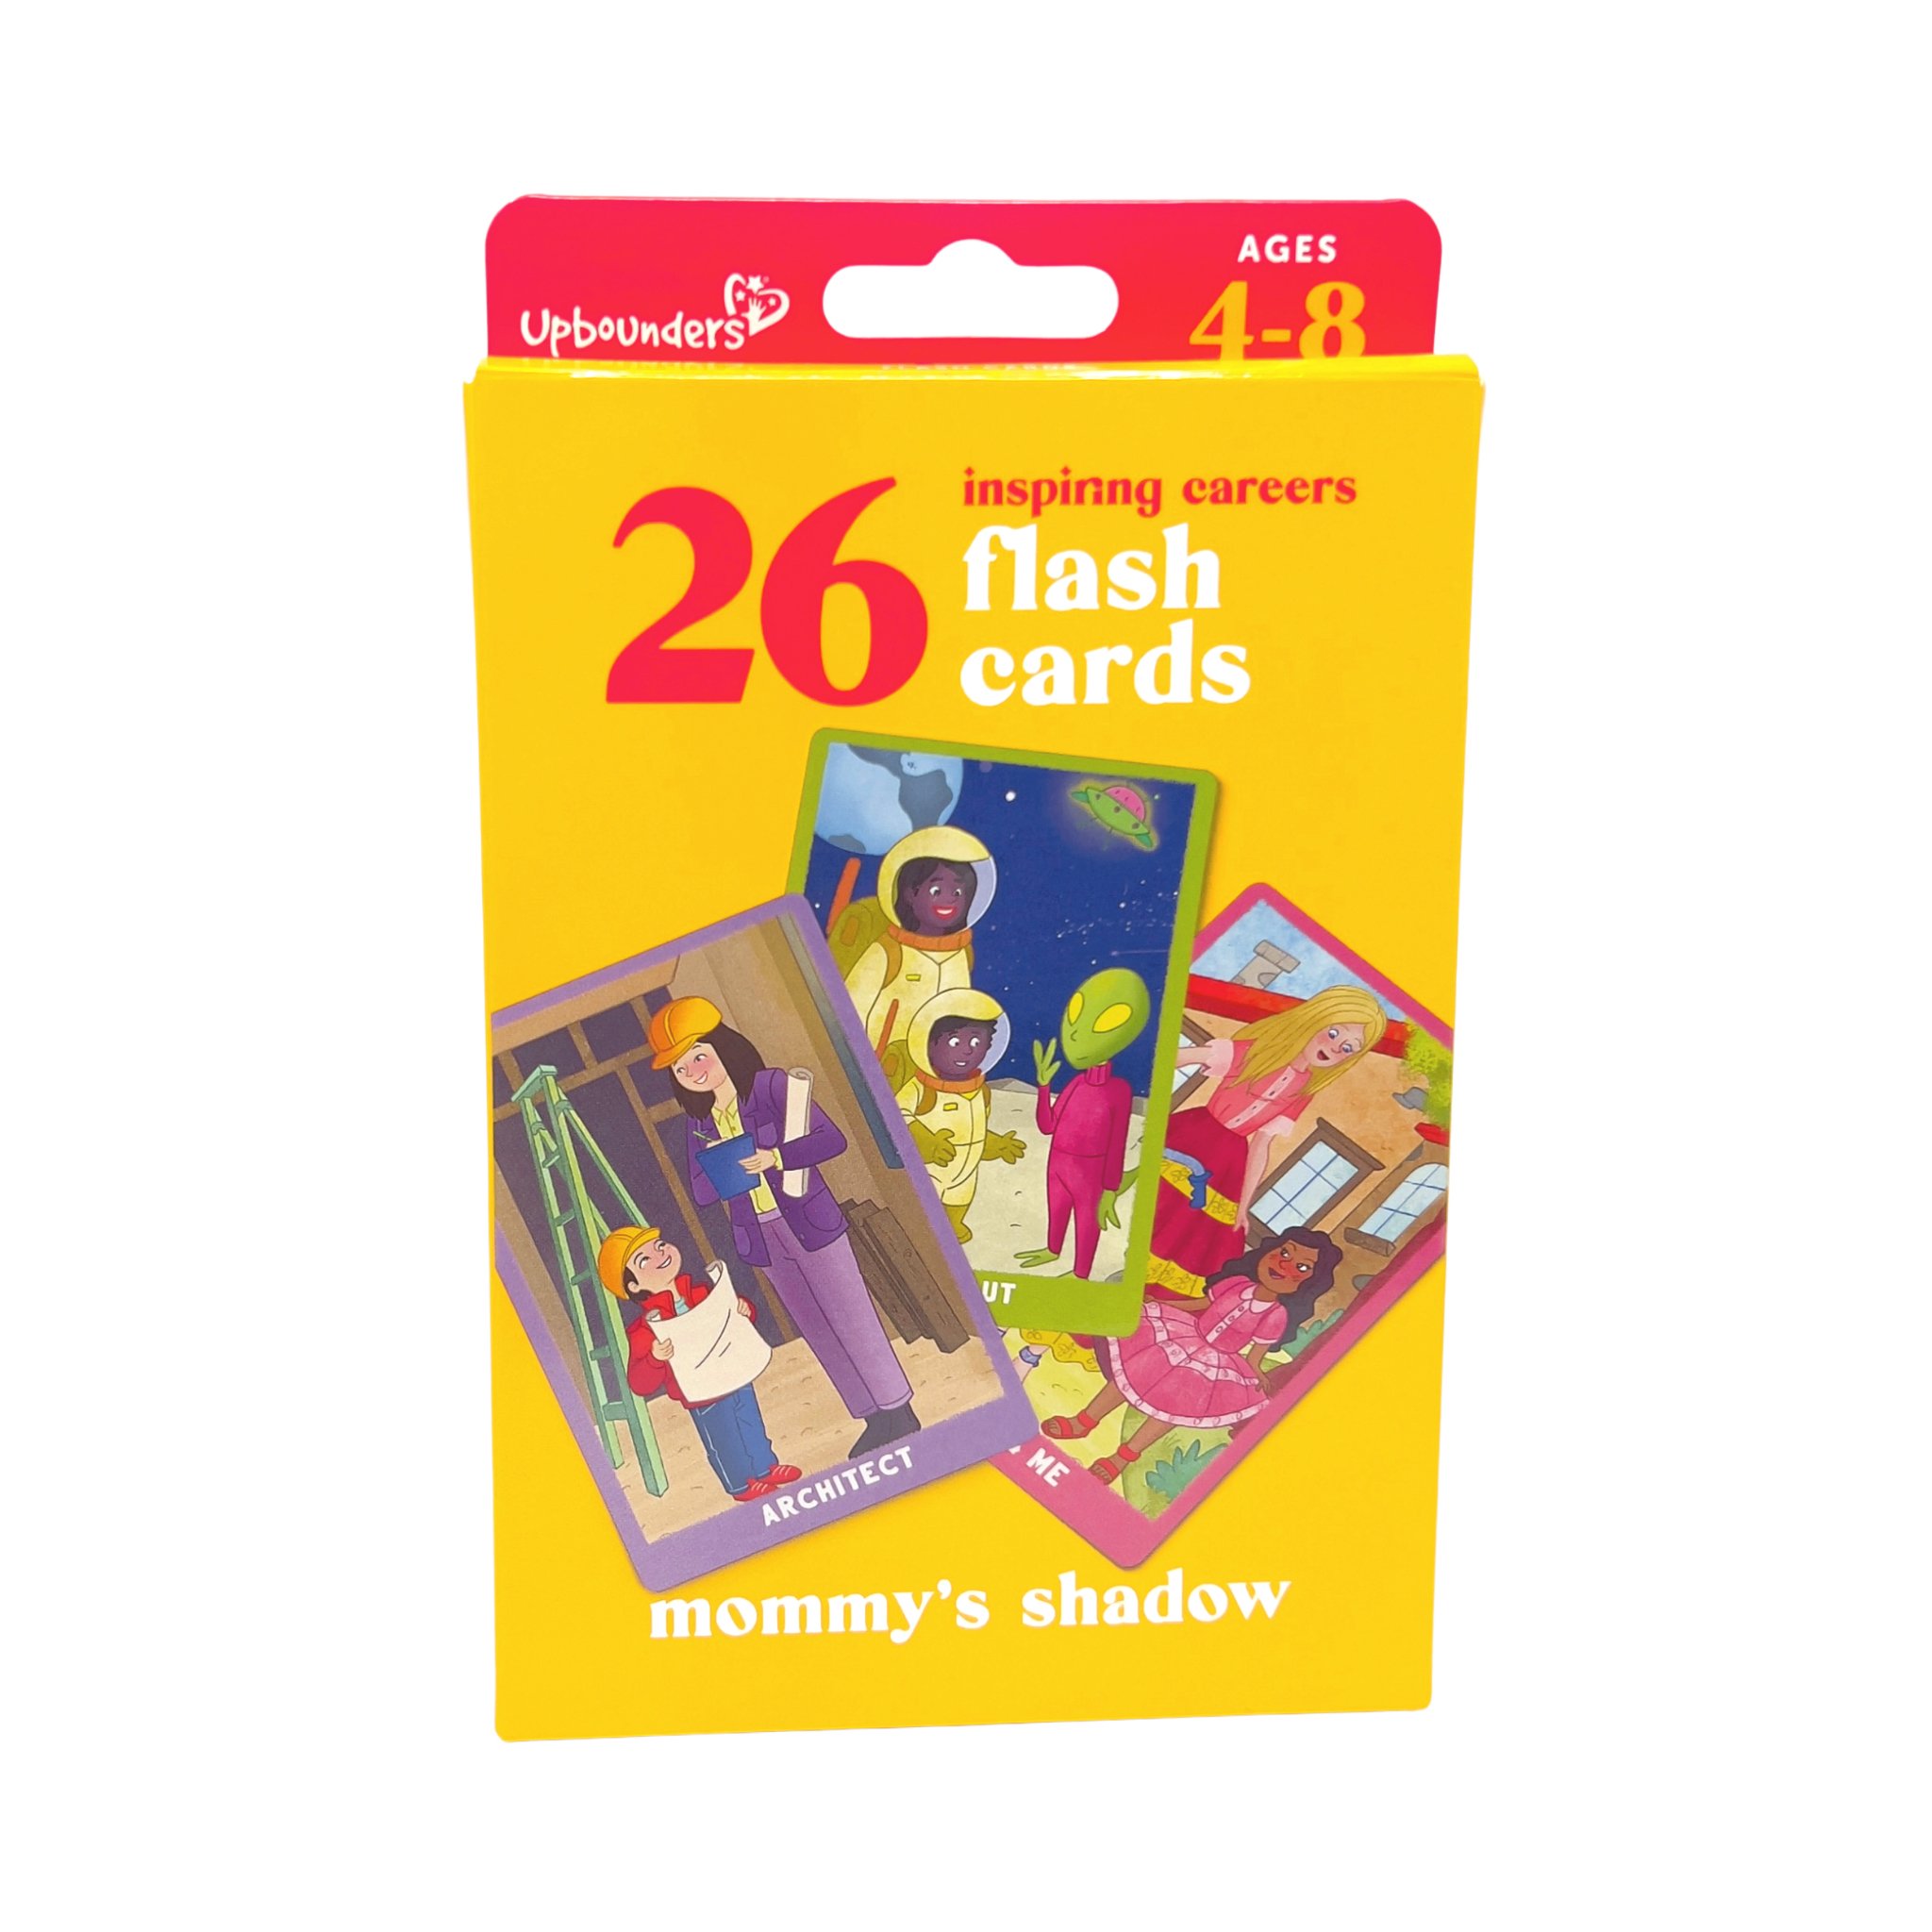 Upbounders® Mommy's Shadow Inspiring Careers Flashcards / $12.99